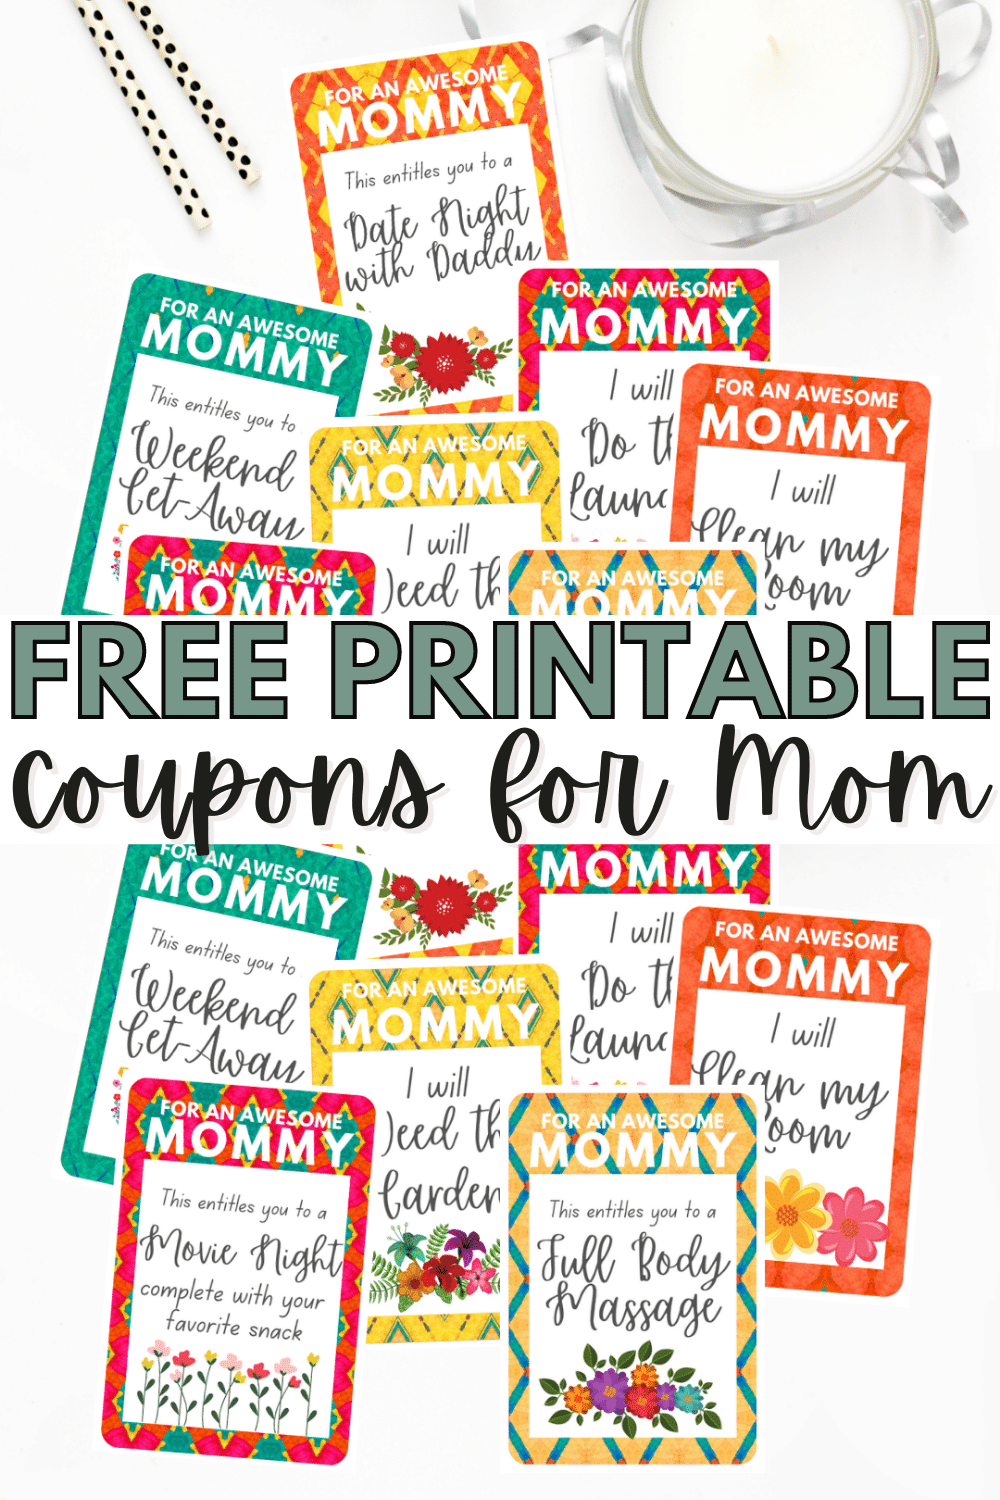 These printable coupons for mom make a great last-minute gift for Mother's Day or mom's birthday. Includes blank and pre-filled coupons! #mothersday #giftsformom #freeprintable #couponsformom via @wondermomwannab